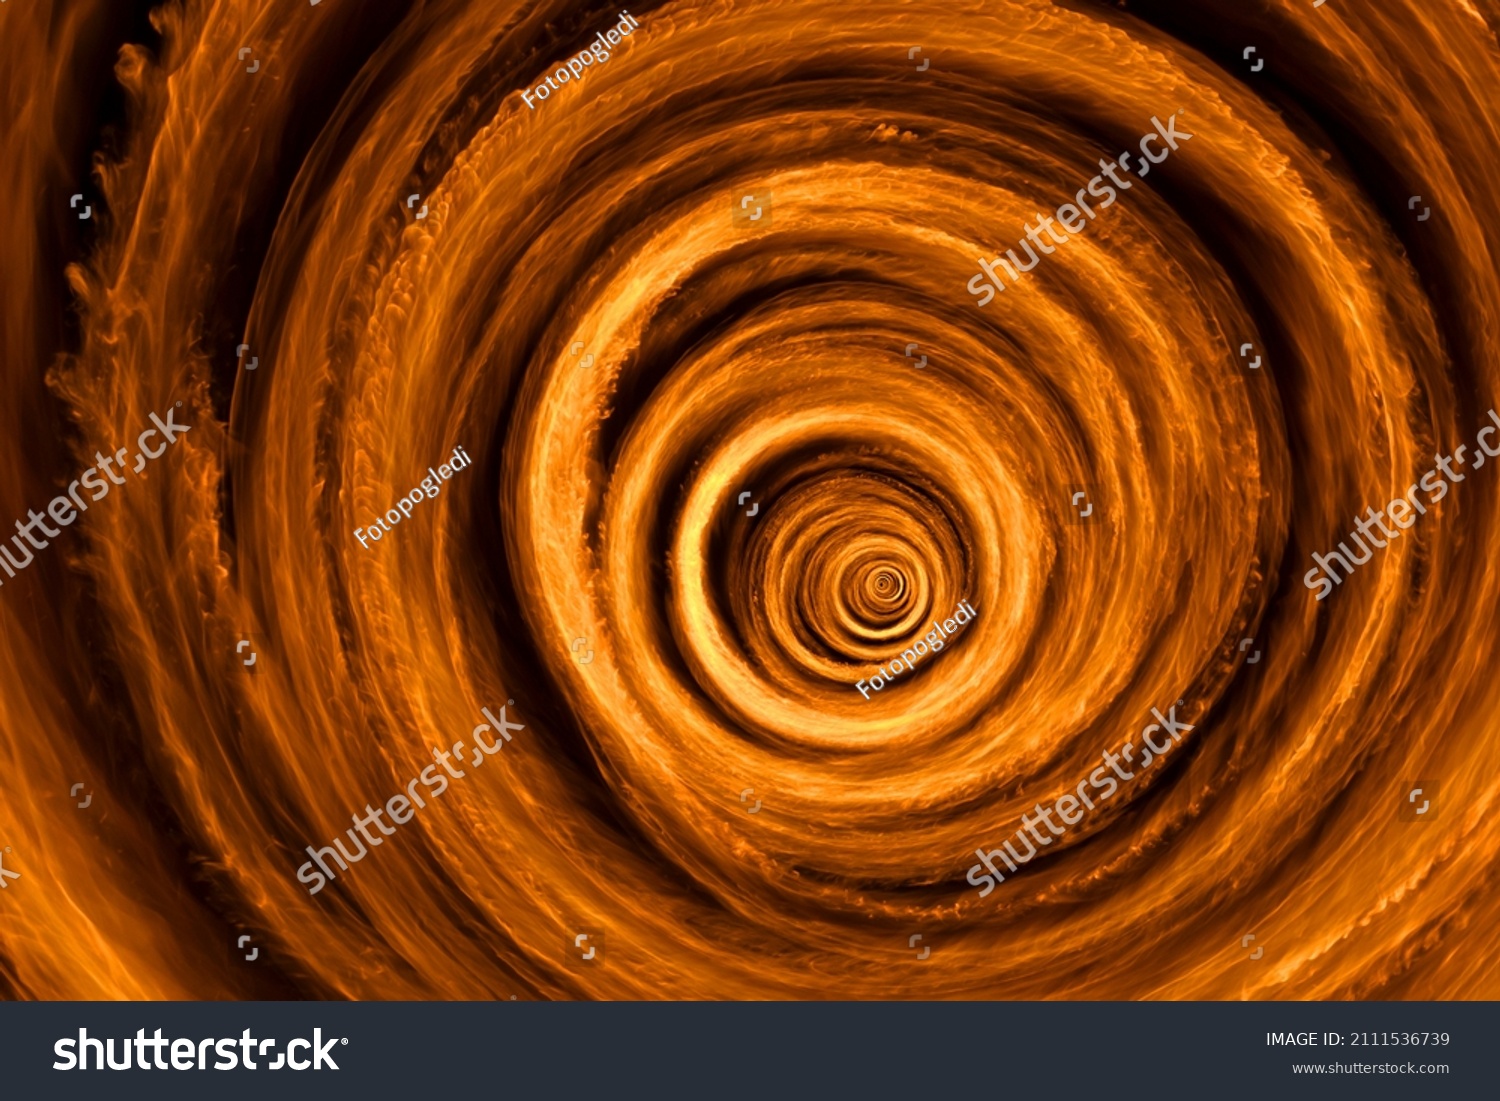 Fire vortex into infinity - Road to hell representation. Photograph made with real fire and very long exposure.  #2111536739